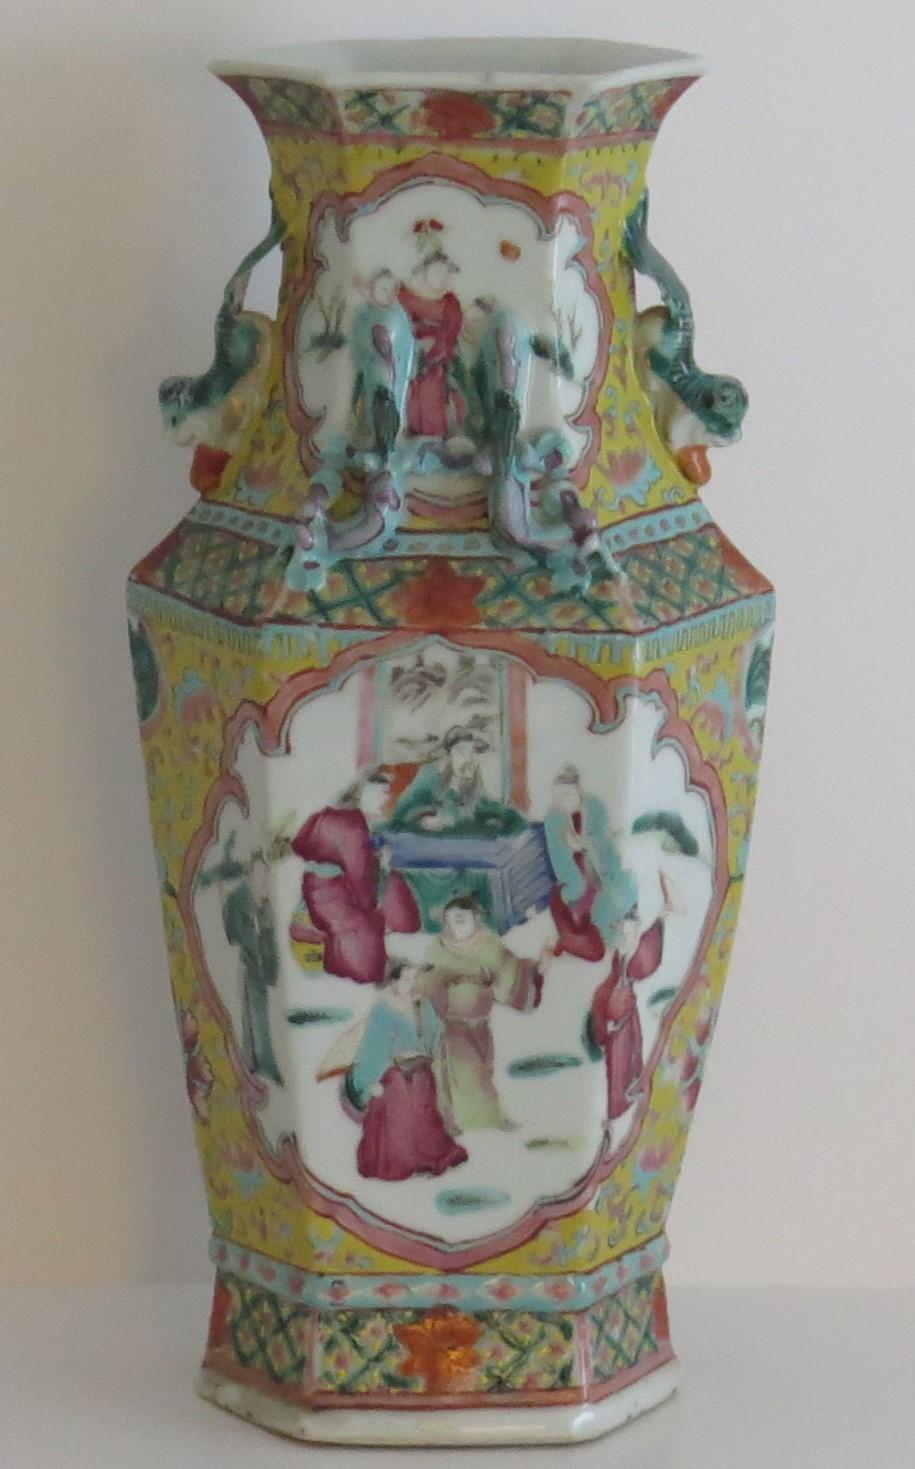 Hand-Painted Chinese Export Vase Famille Rose Porcelain, Late Qing or Early Republic Period